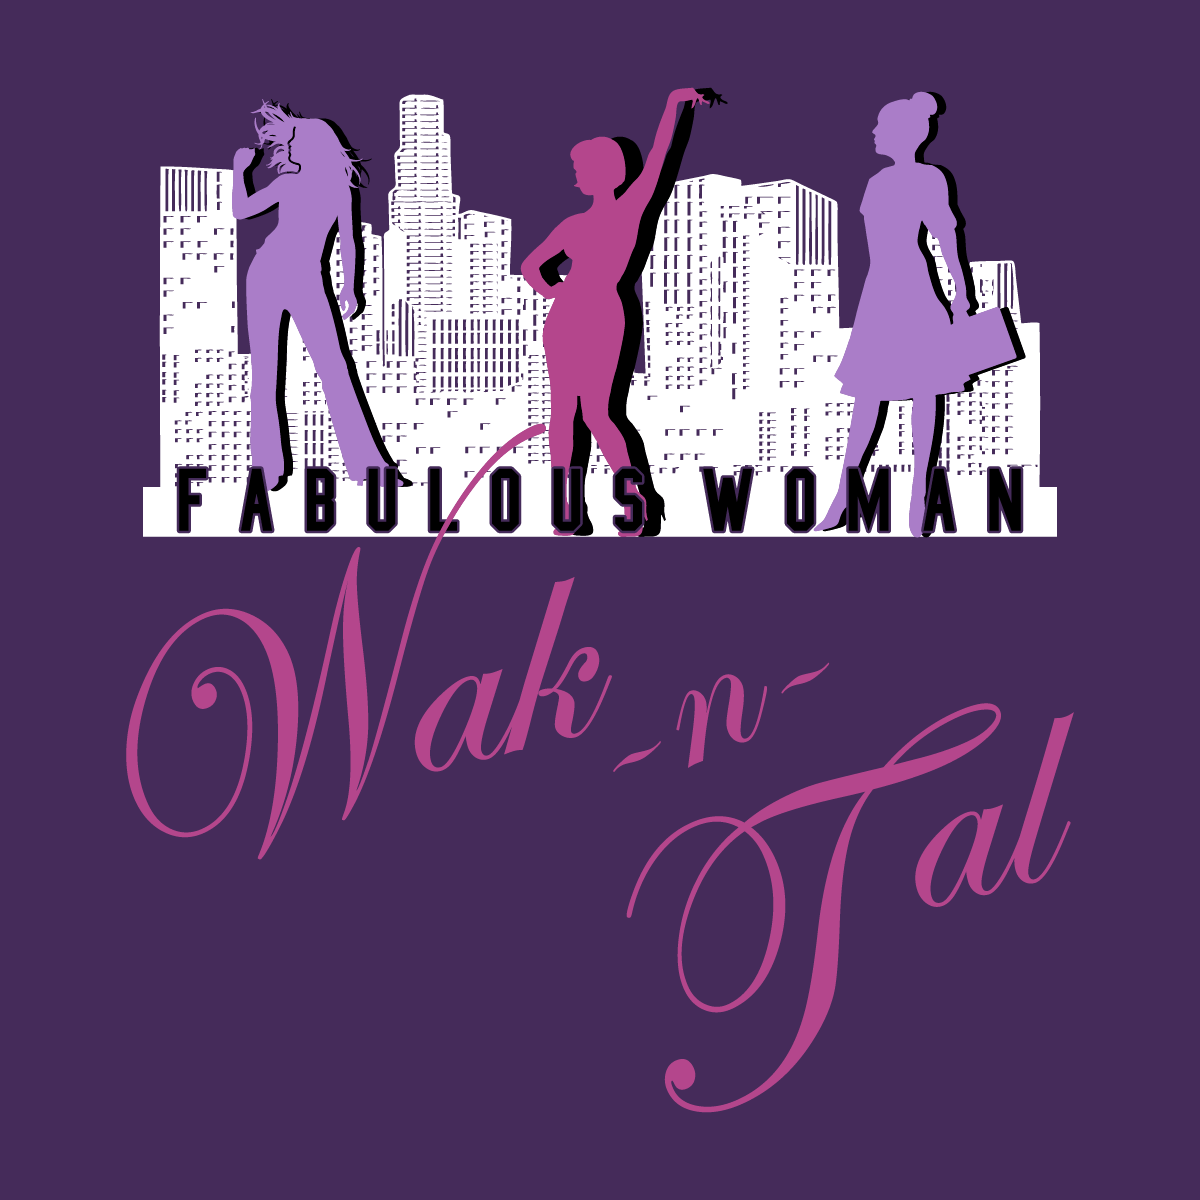 Female Empowerment Through What You Wear! shirt design - zoomed